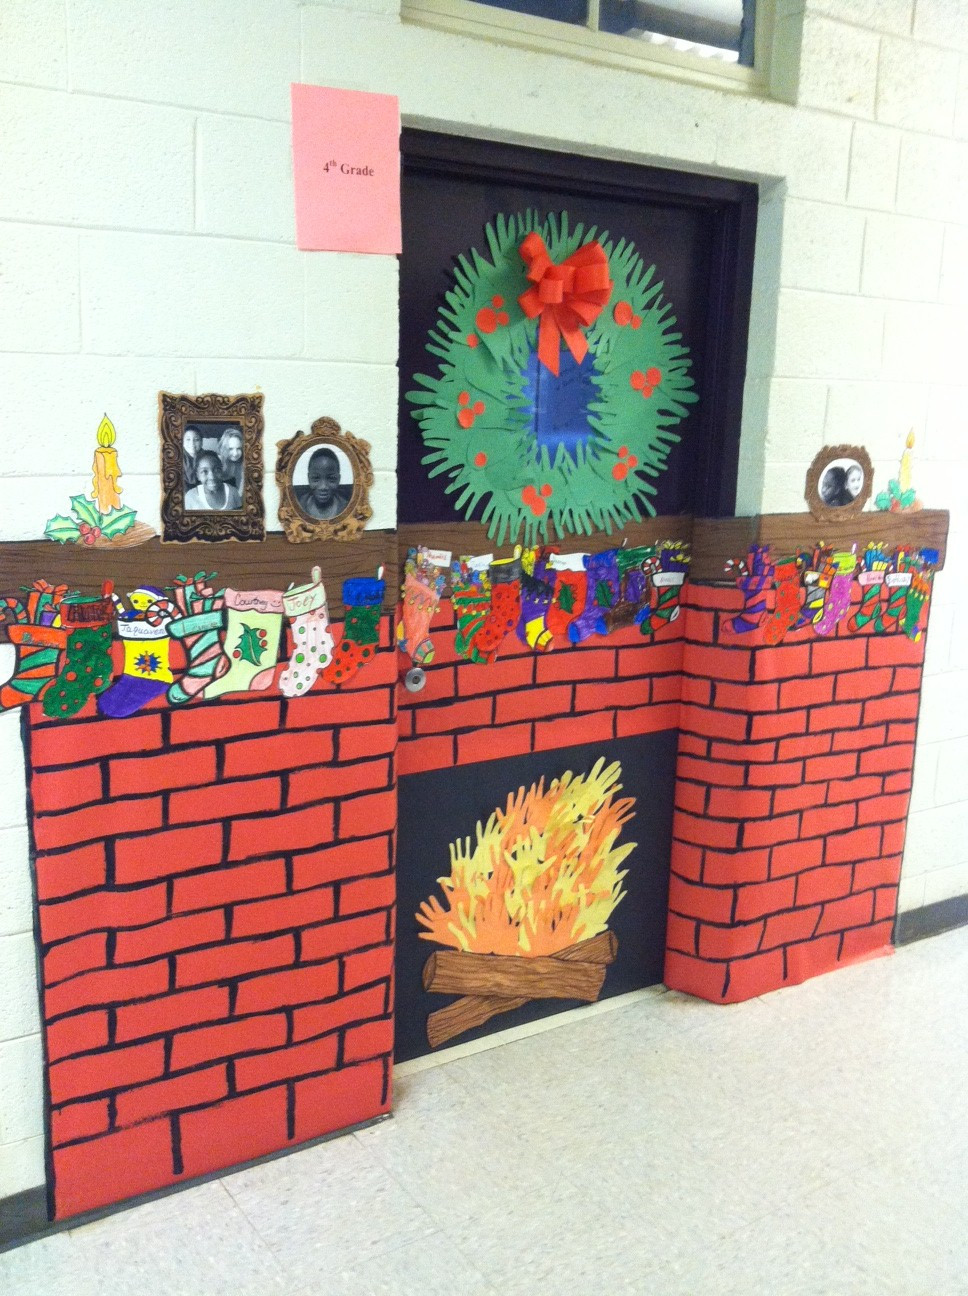 Fireplace Christmas Door Decorations
 Decorated Door Contest at 21st Century munity Learning